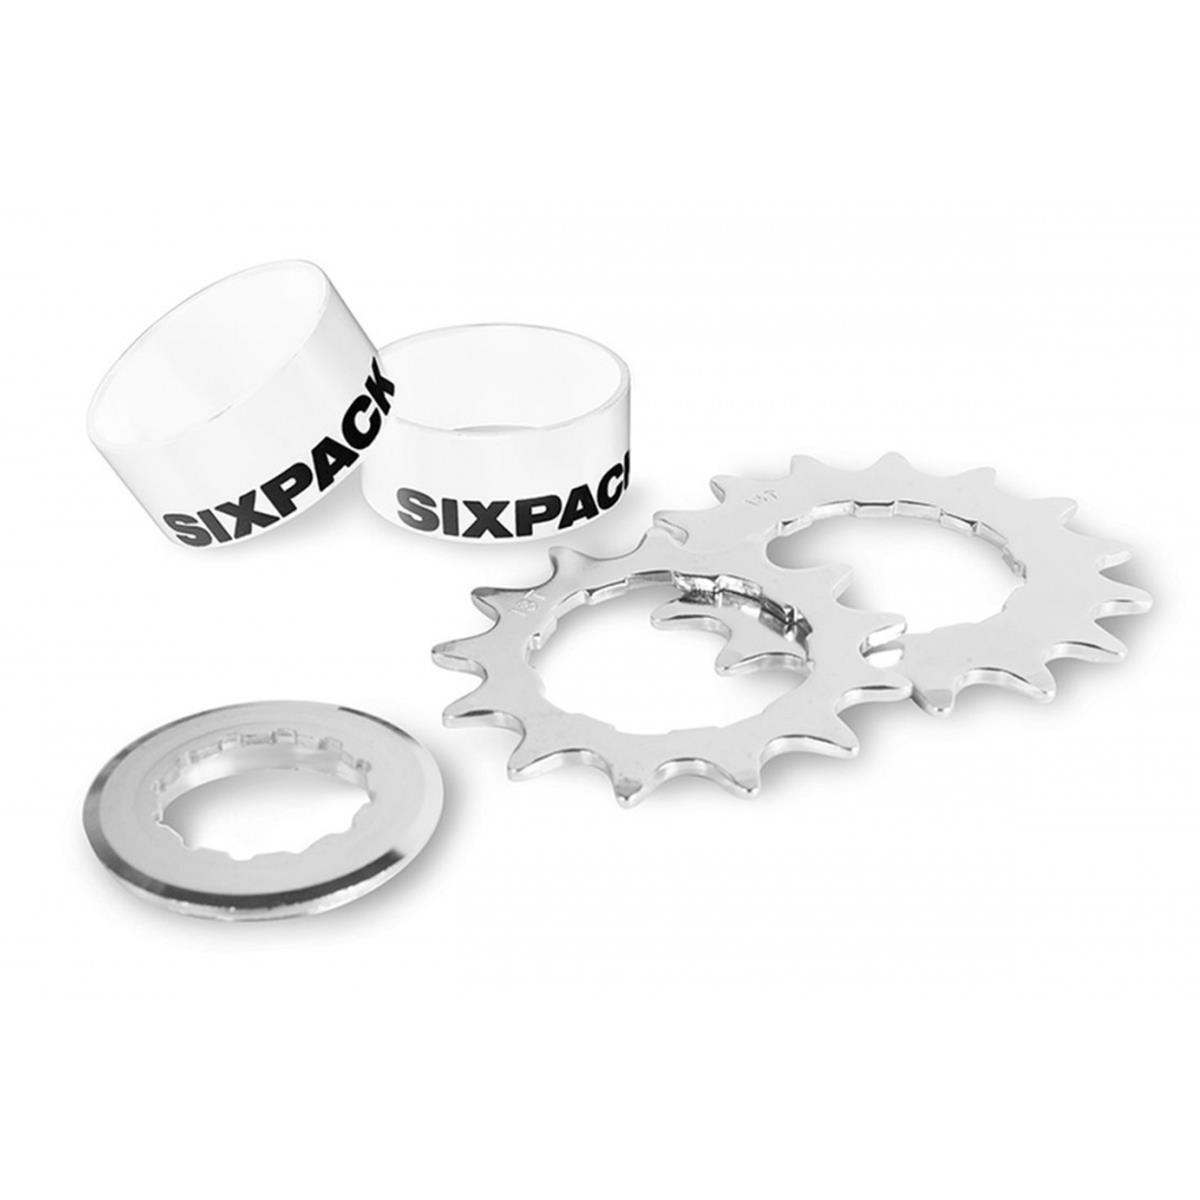 Sixpack Kit de conversion Single Speed  White, incl. 2 Chainrings (13 & 15T), fits 8/9710-speed Shimano/Sram Freewheels